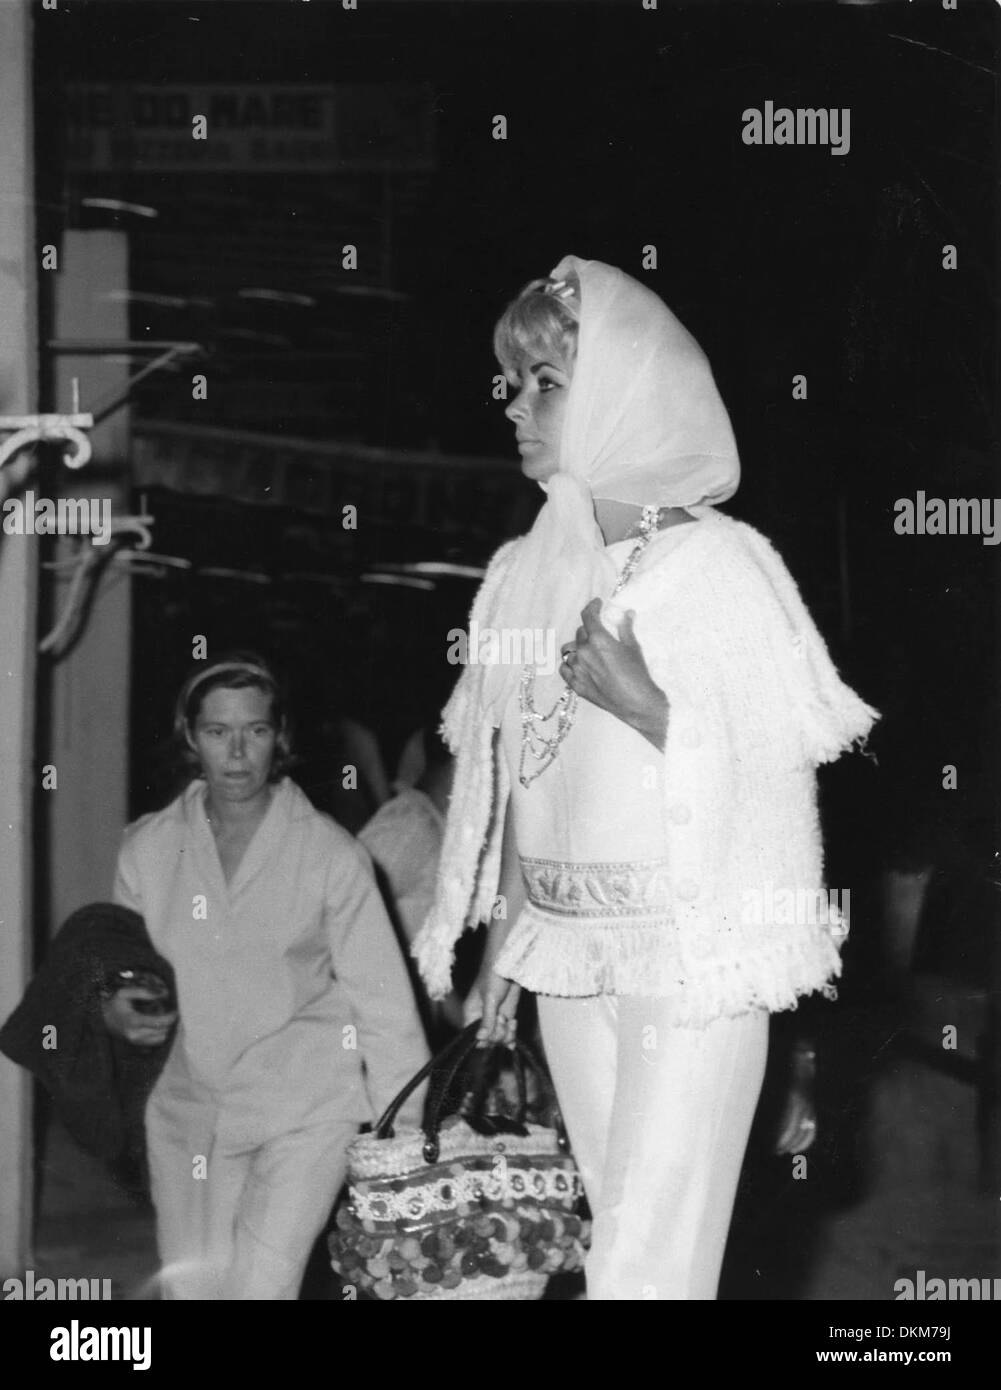 June 25, 1962 - Rome, Italy - Two time Academy Award winning actress, ELIZABETH TAYLOR (1932-2011), is shopping at Iachia, whild in Rome finishing the filming of the movie, 'Cleopatra.' Here Liz Taylor has blonde hair. (Credit Image: © KEYSTONE Pictures USA) Stock Photo